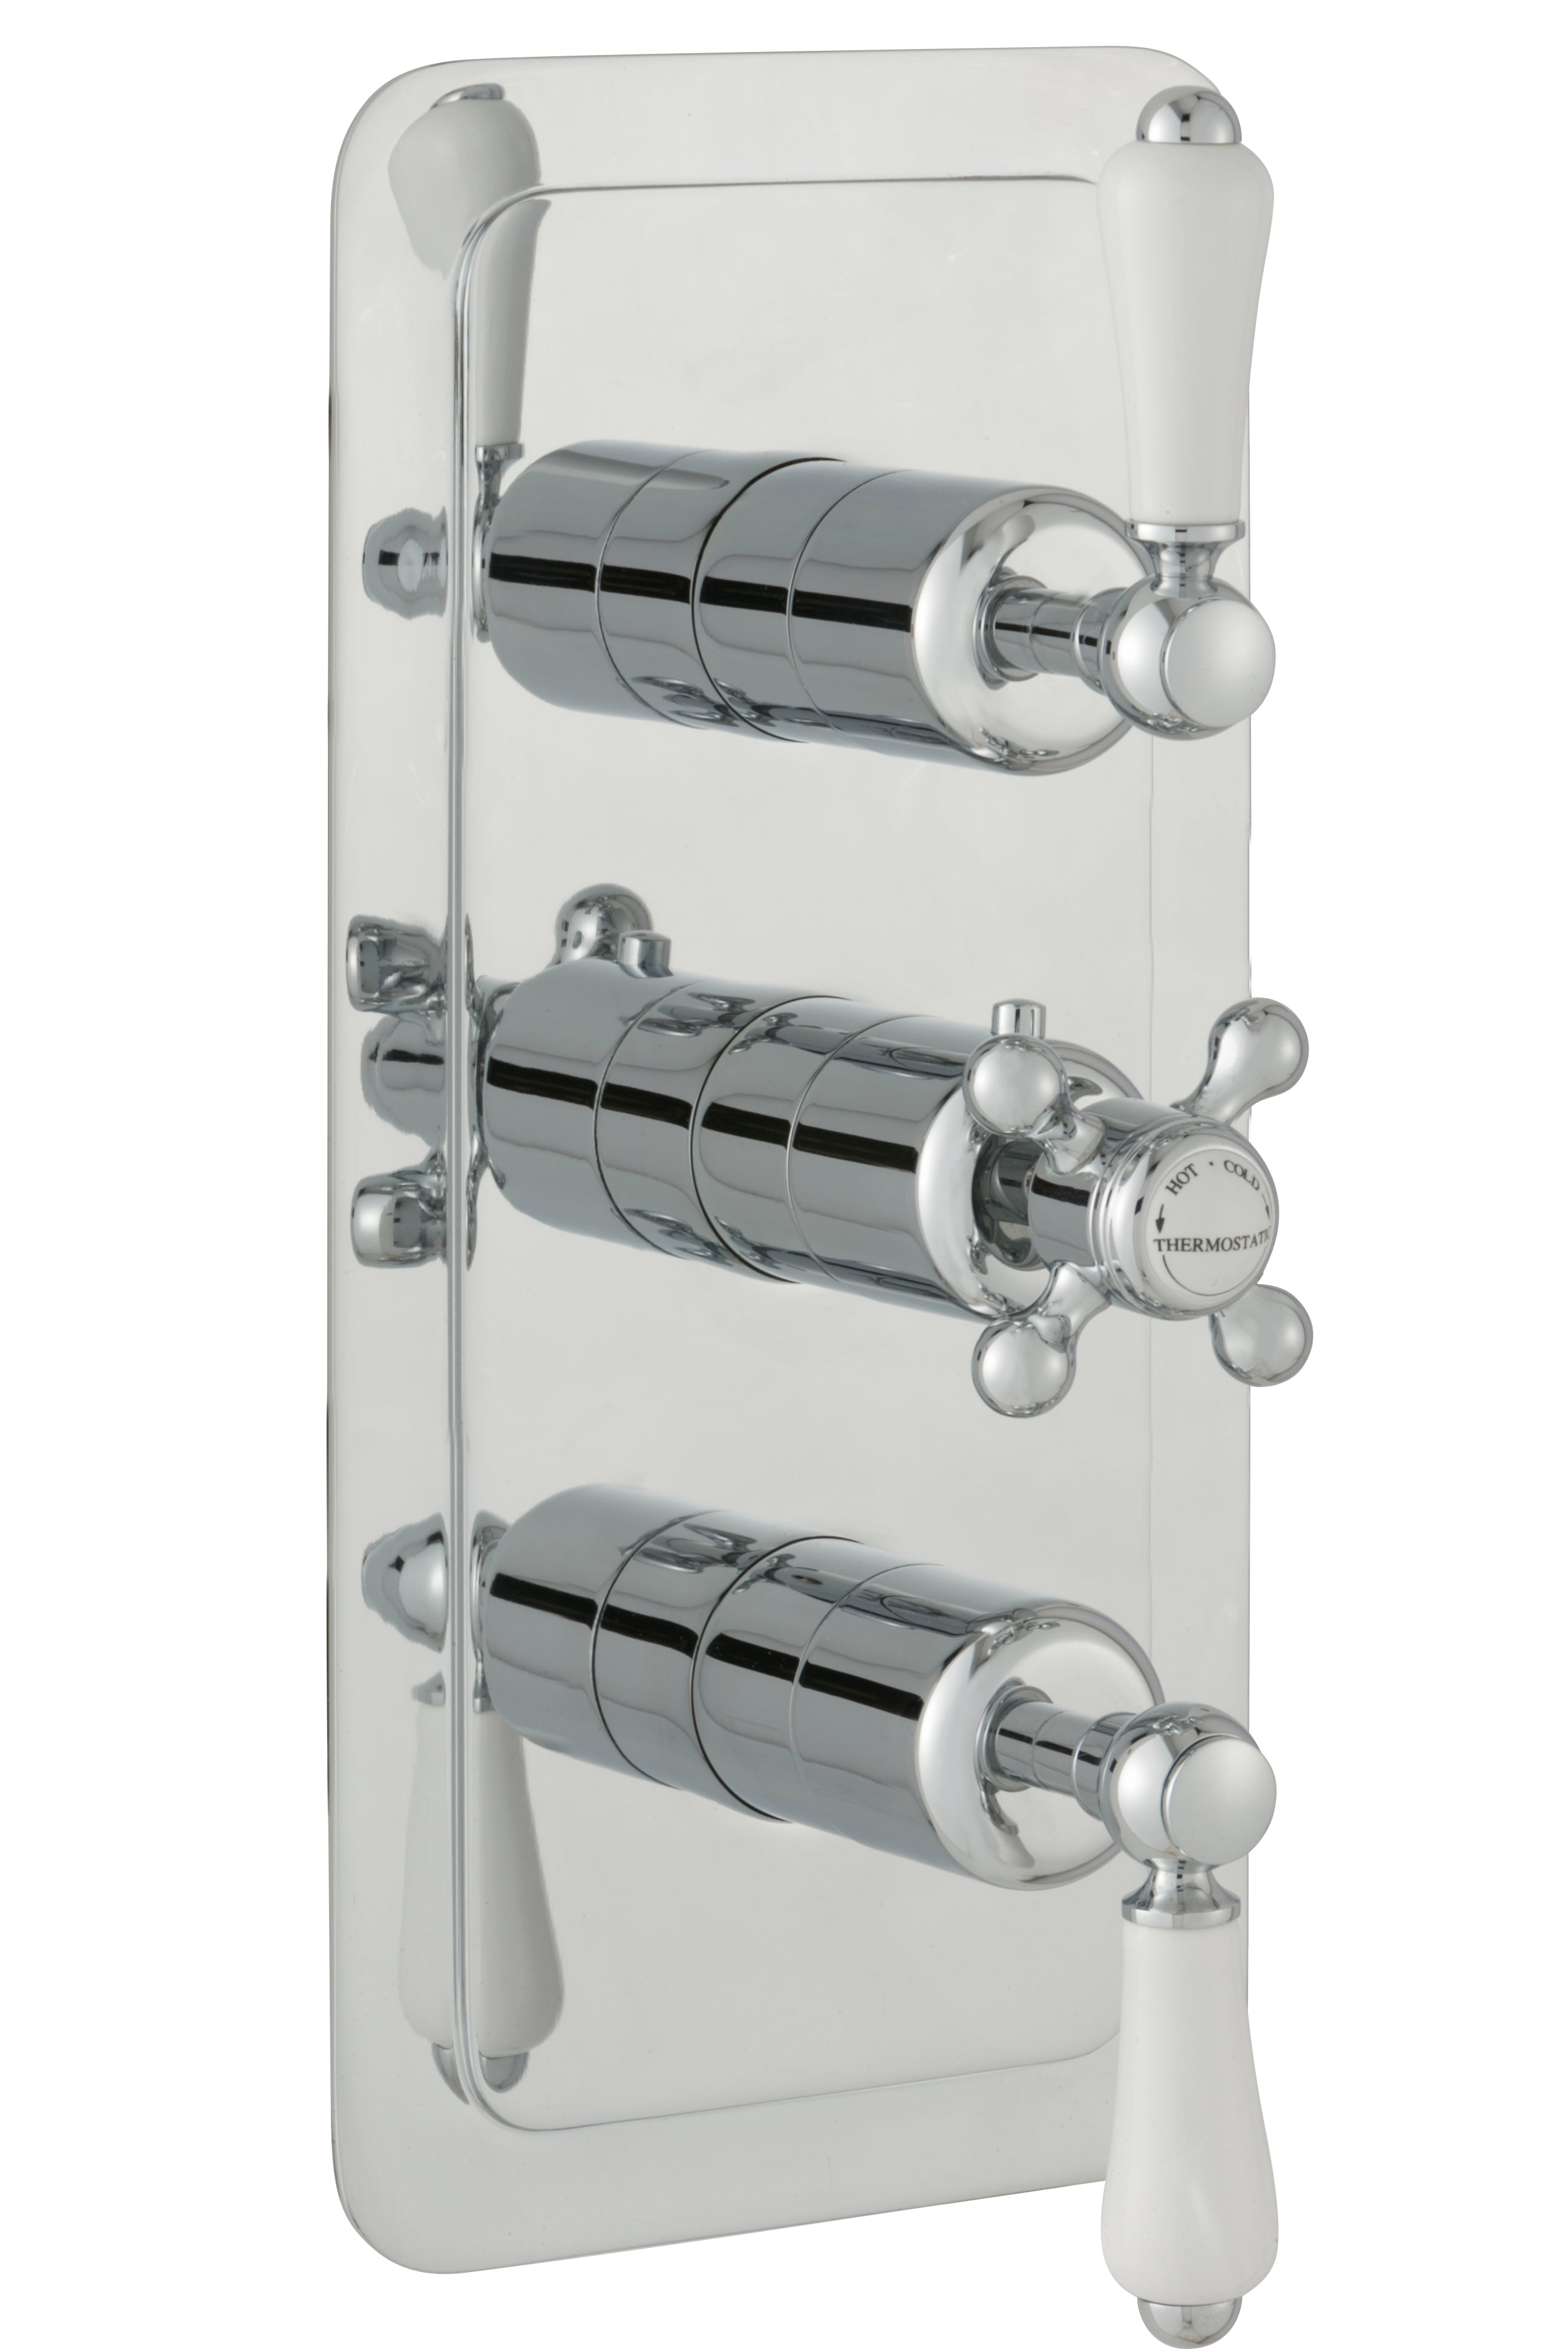 Chester Lever Two Outlet 3 Control Concealed Thermostatic Shower Valve Vertical -Chrome